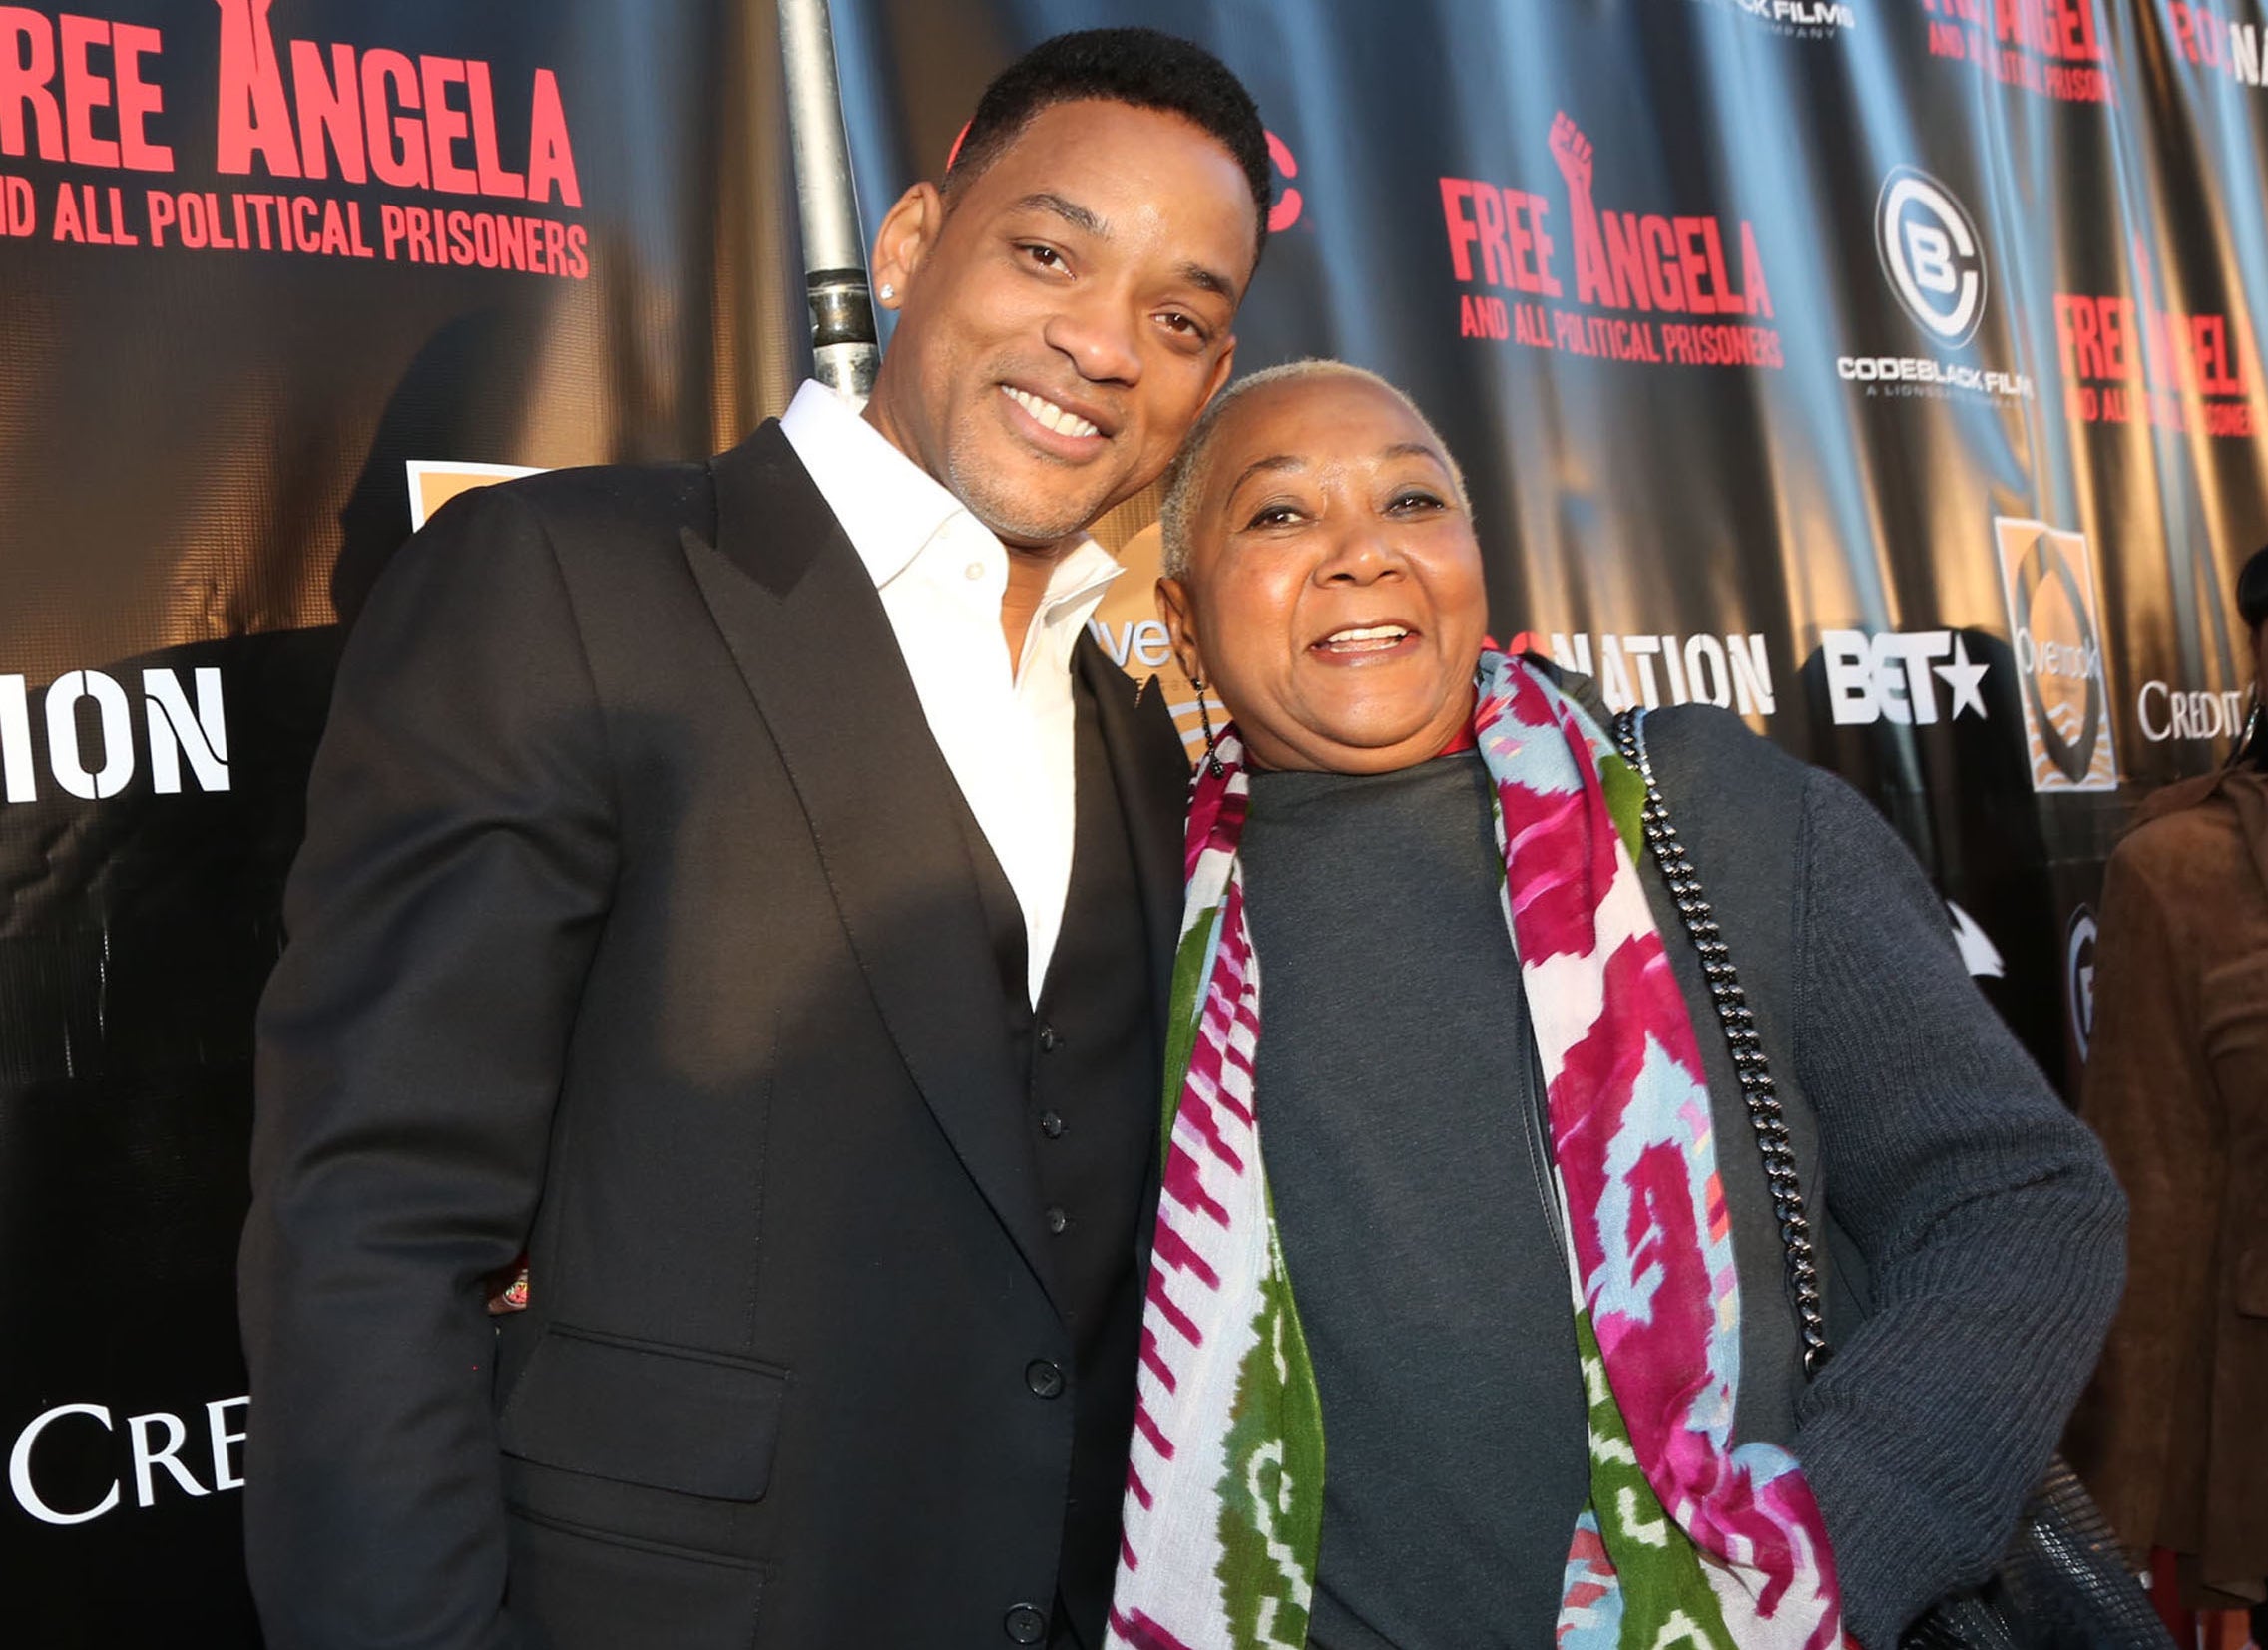 Will poses with his mother at an event